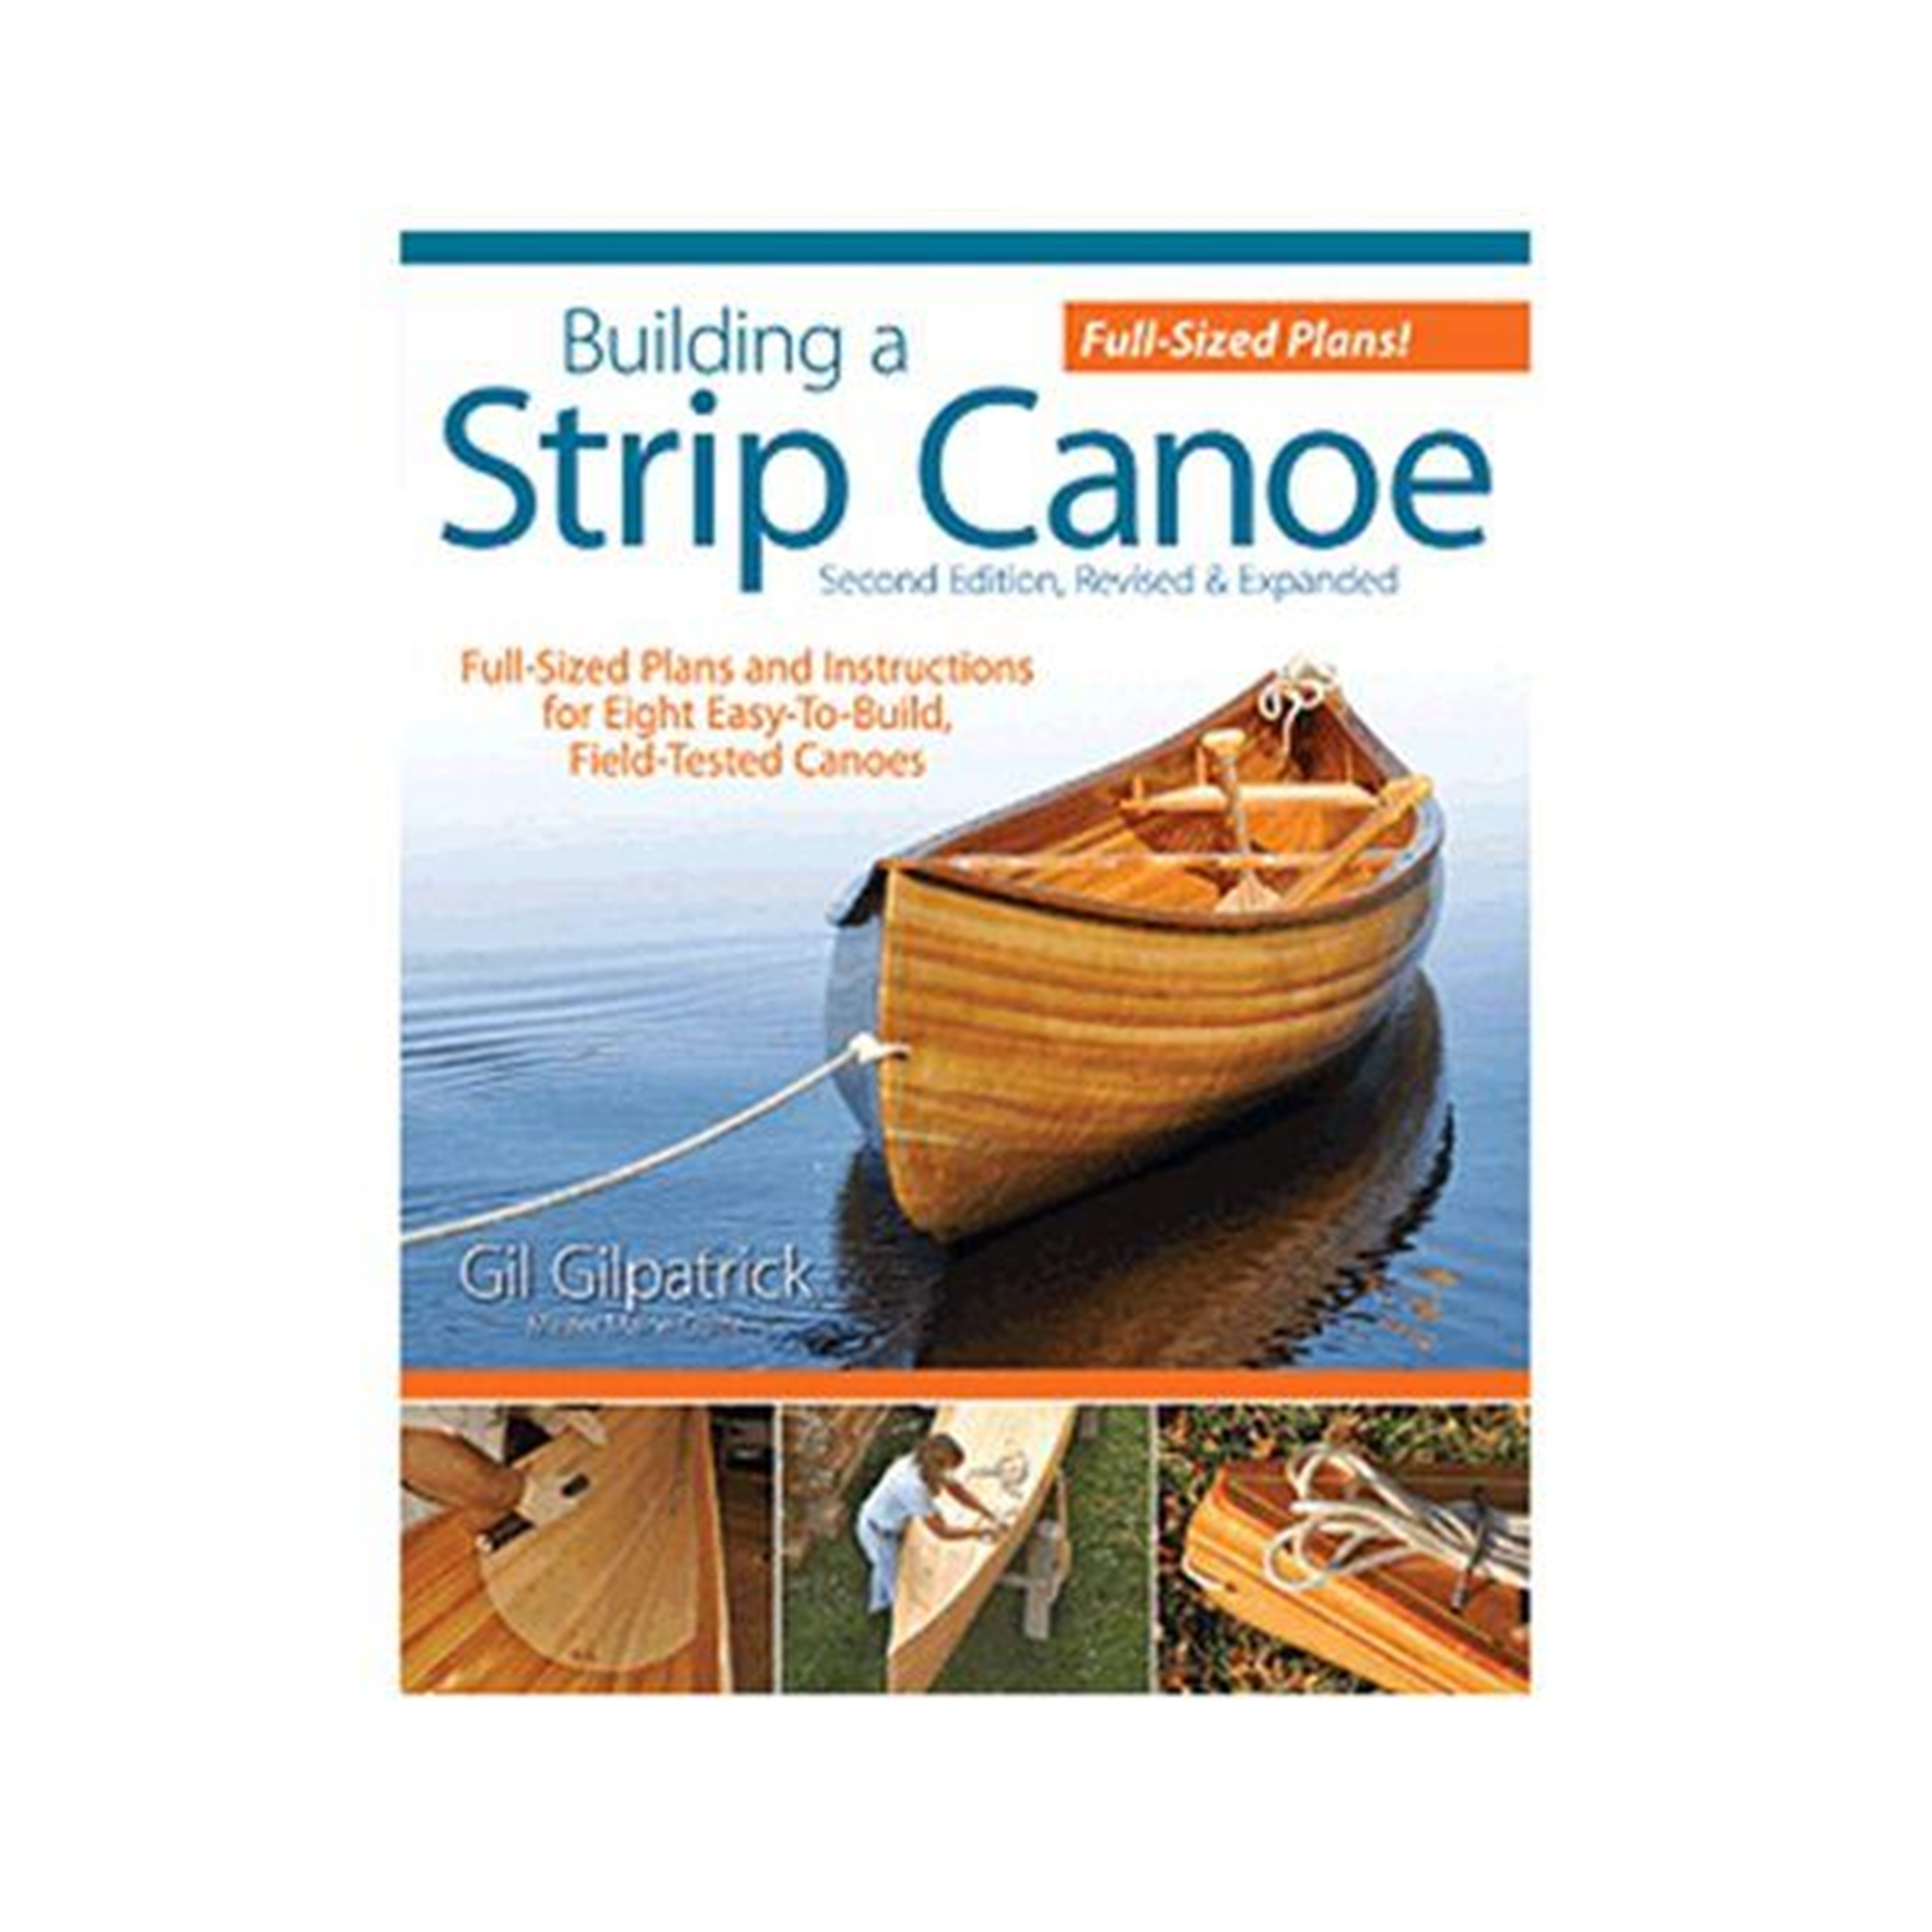 Building A Strip Canoe, 2nd Edition, Revised And Expanded